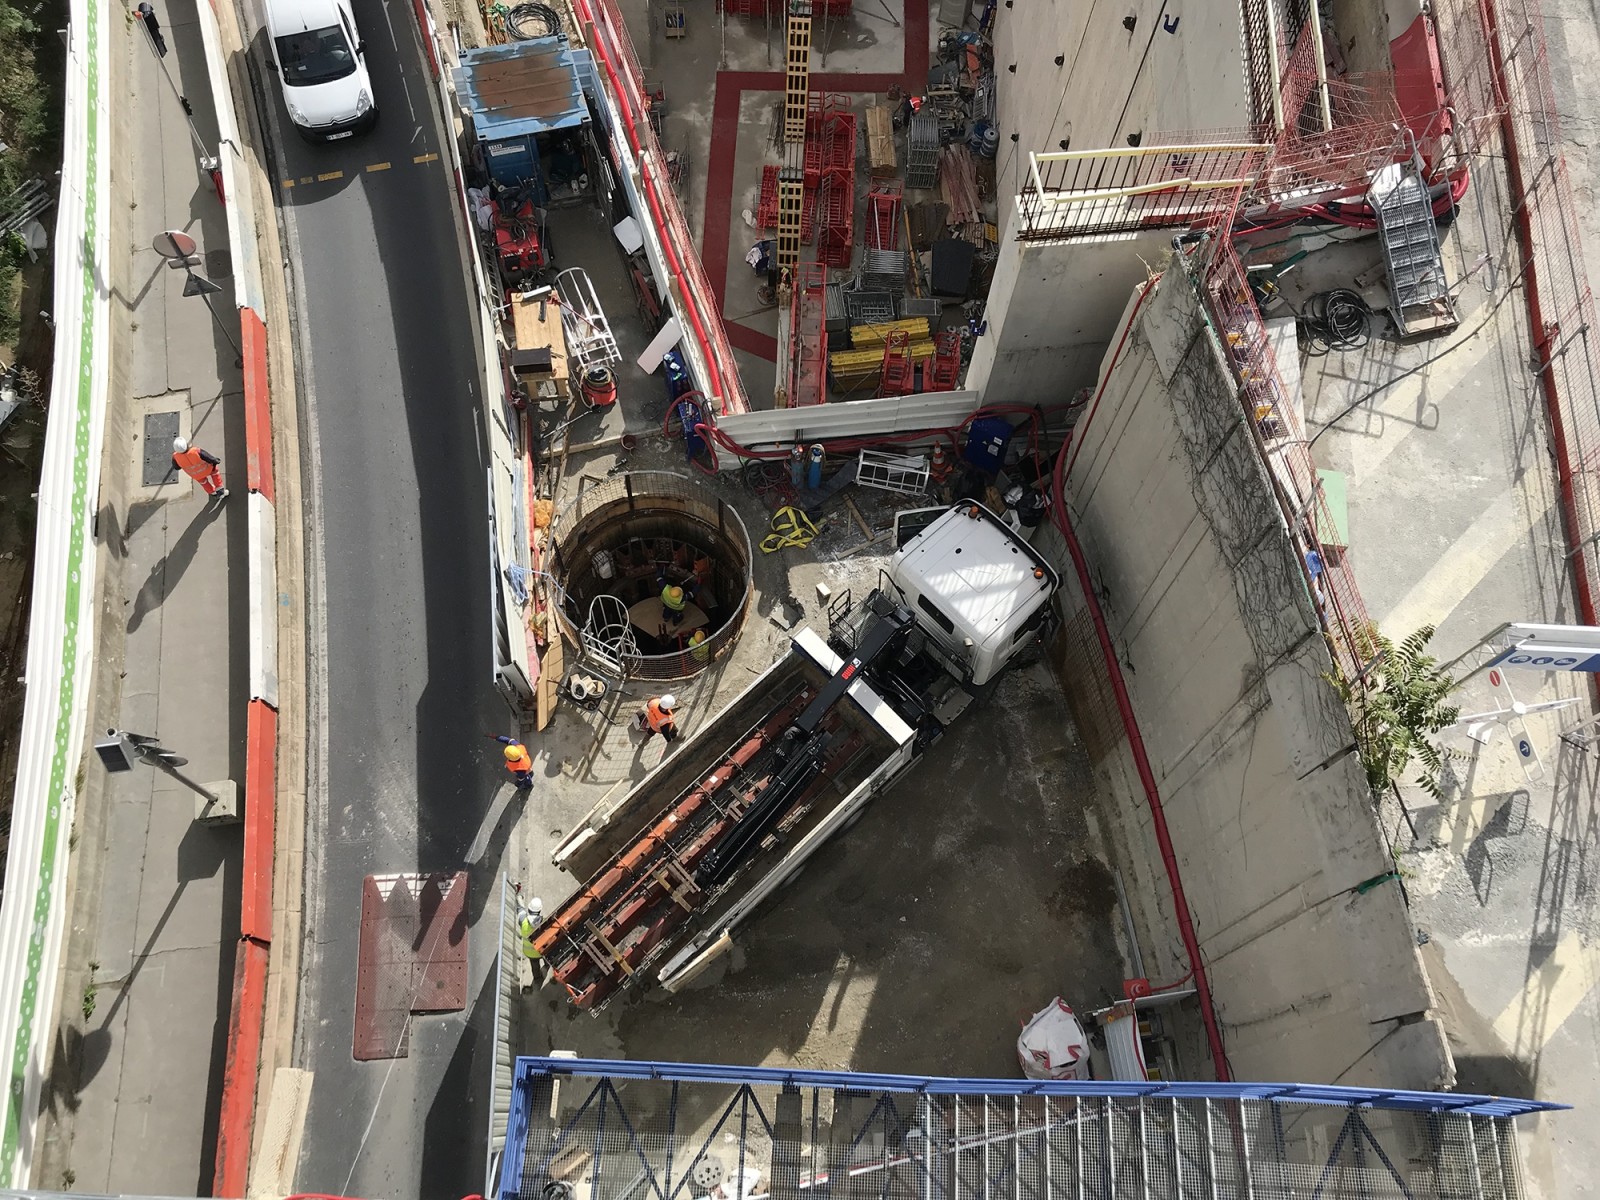 October 2019 - Construction of the Enertherm well by them